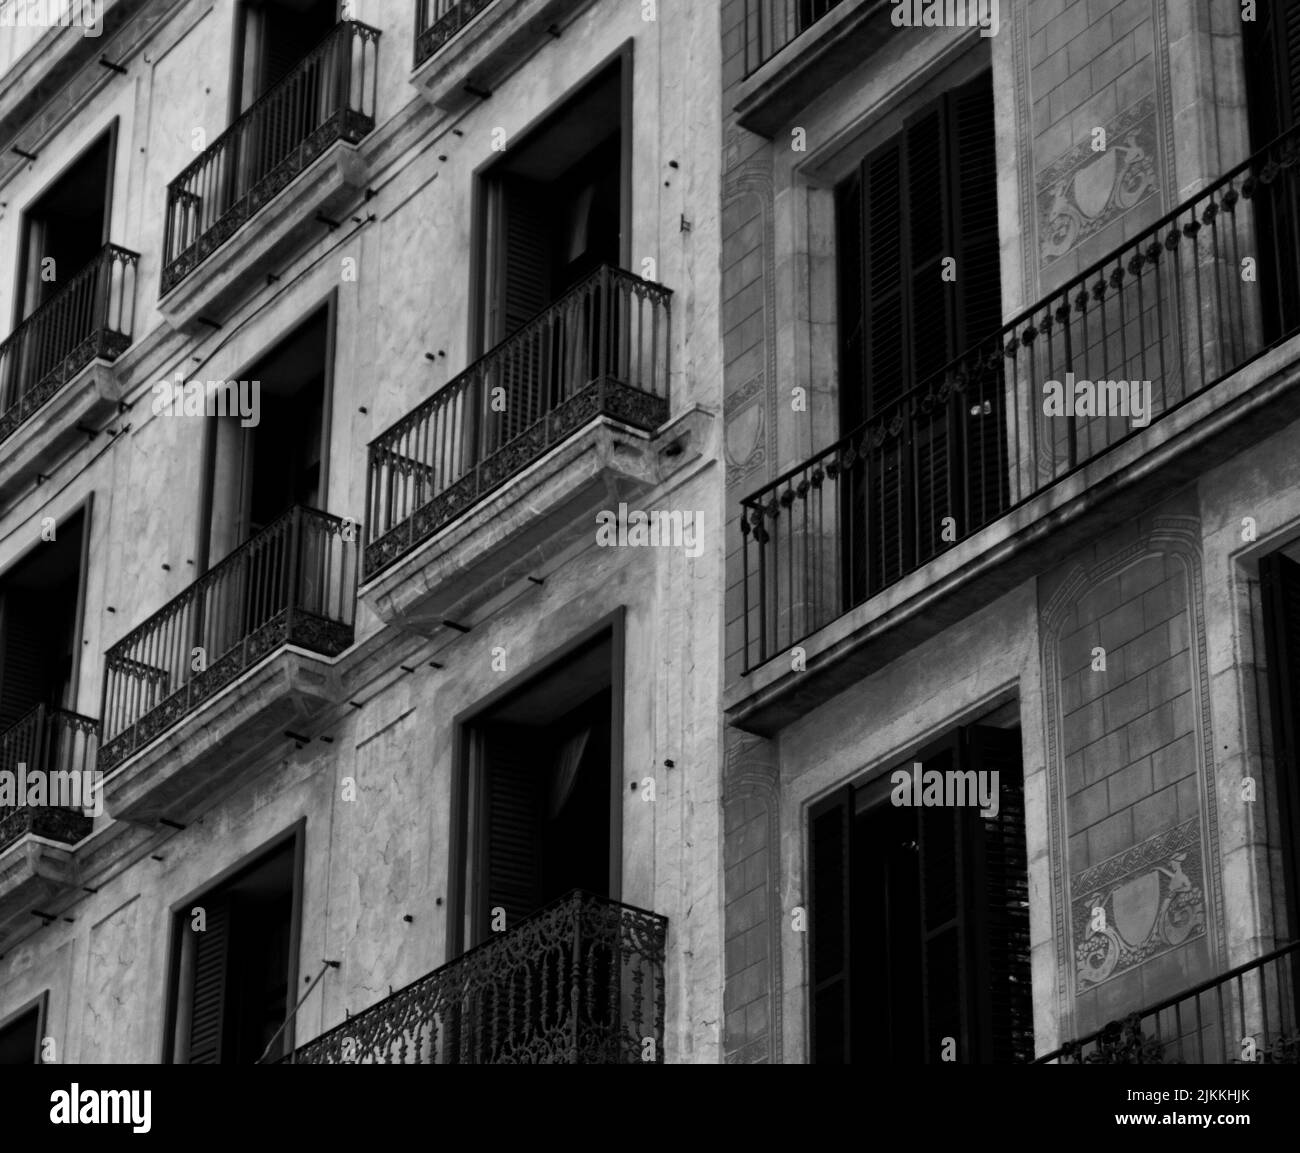 A black and white image of an old European apartment building in the city center with small balconies Stock Photo